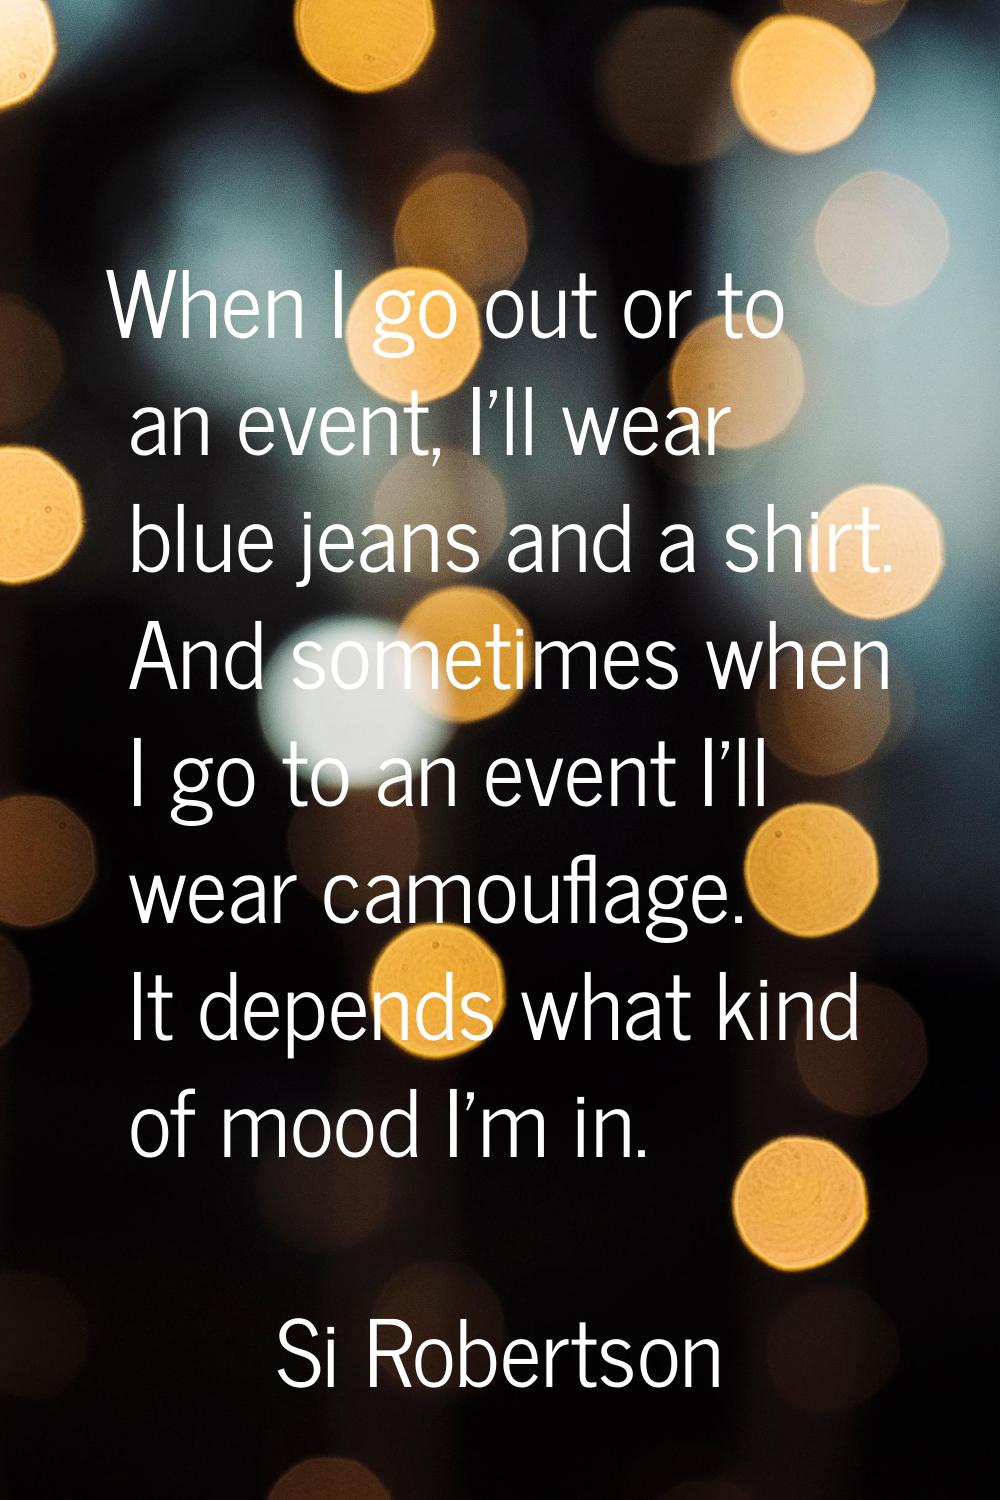 When I go out or to an event, I'll wear blue jeans and a shirt. And sometimes when I go to an event